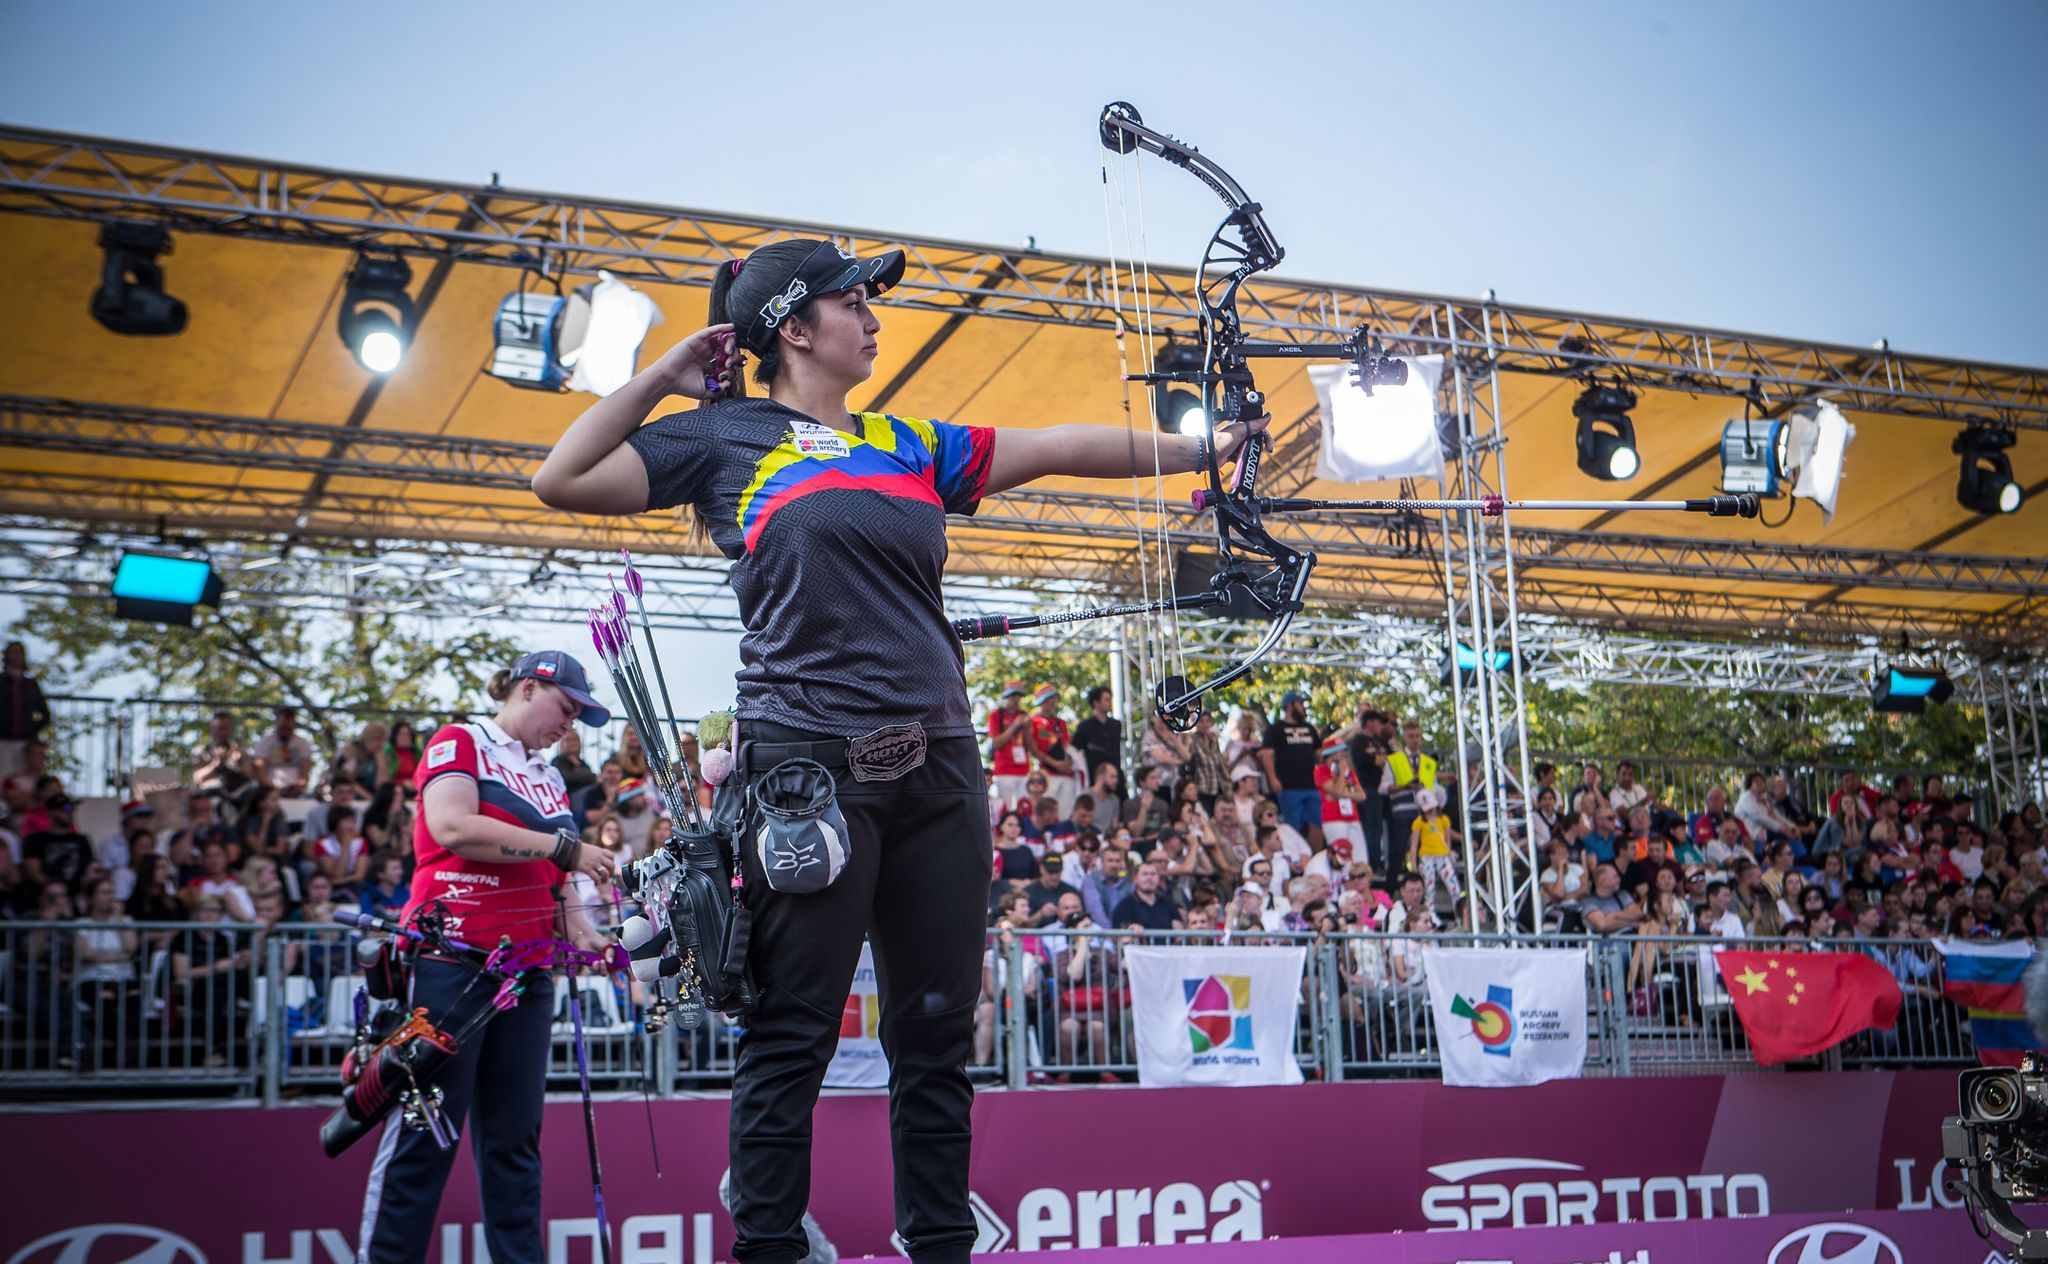 Sara Lopez won a record fifth World Cup Final title ©World Archery